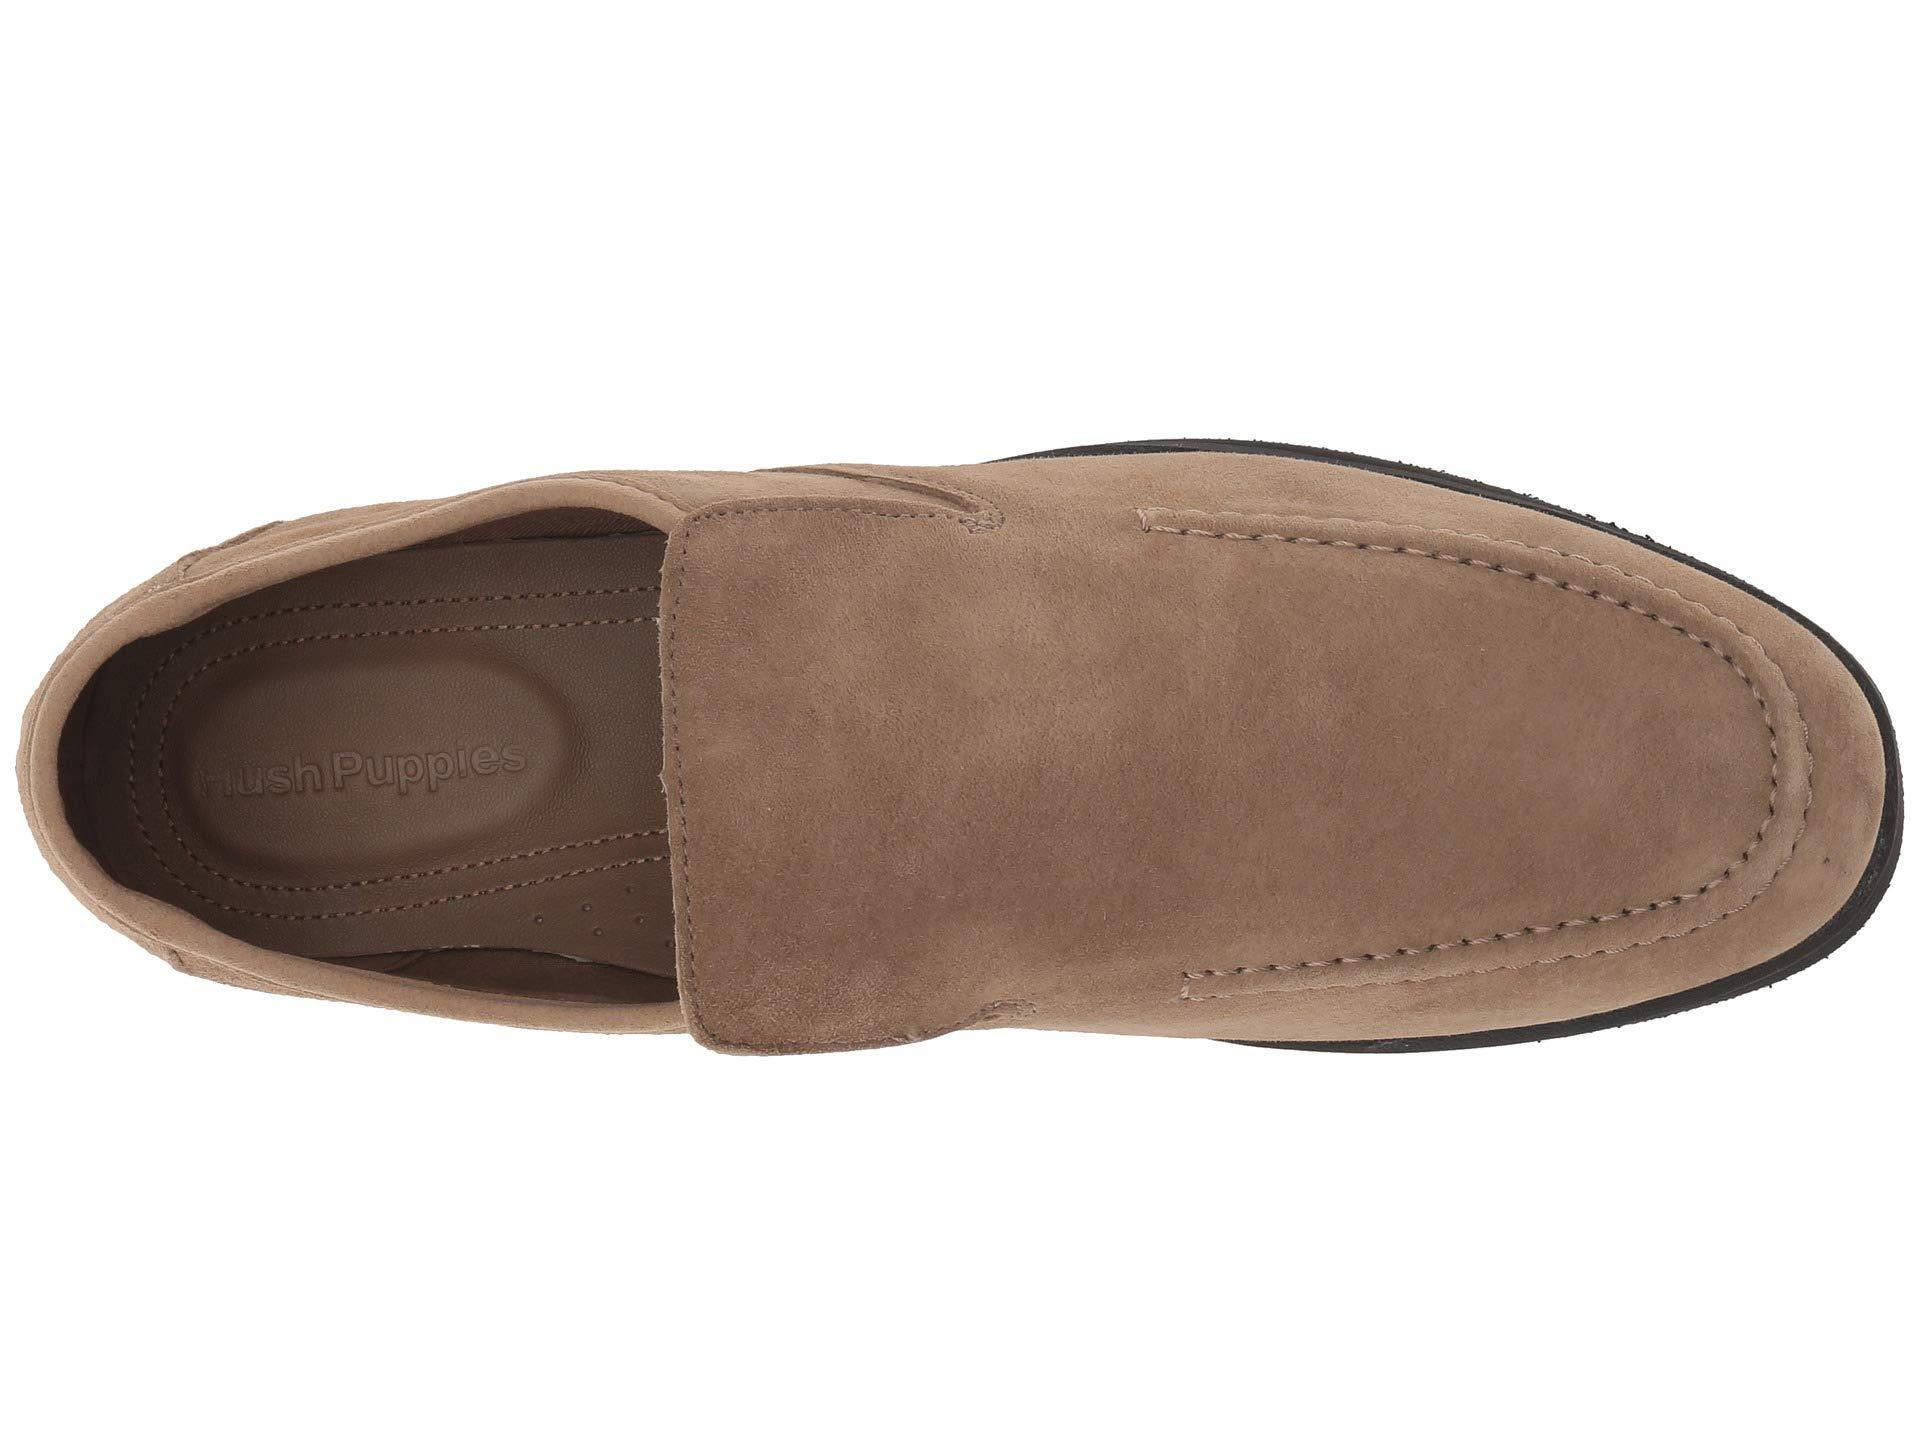 Hush Puppies Suede Bracco Loafer in Taupe Suede (Brown) for Men - Lyst